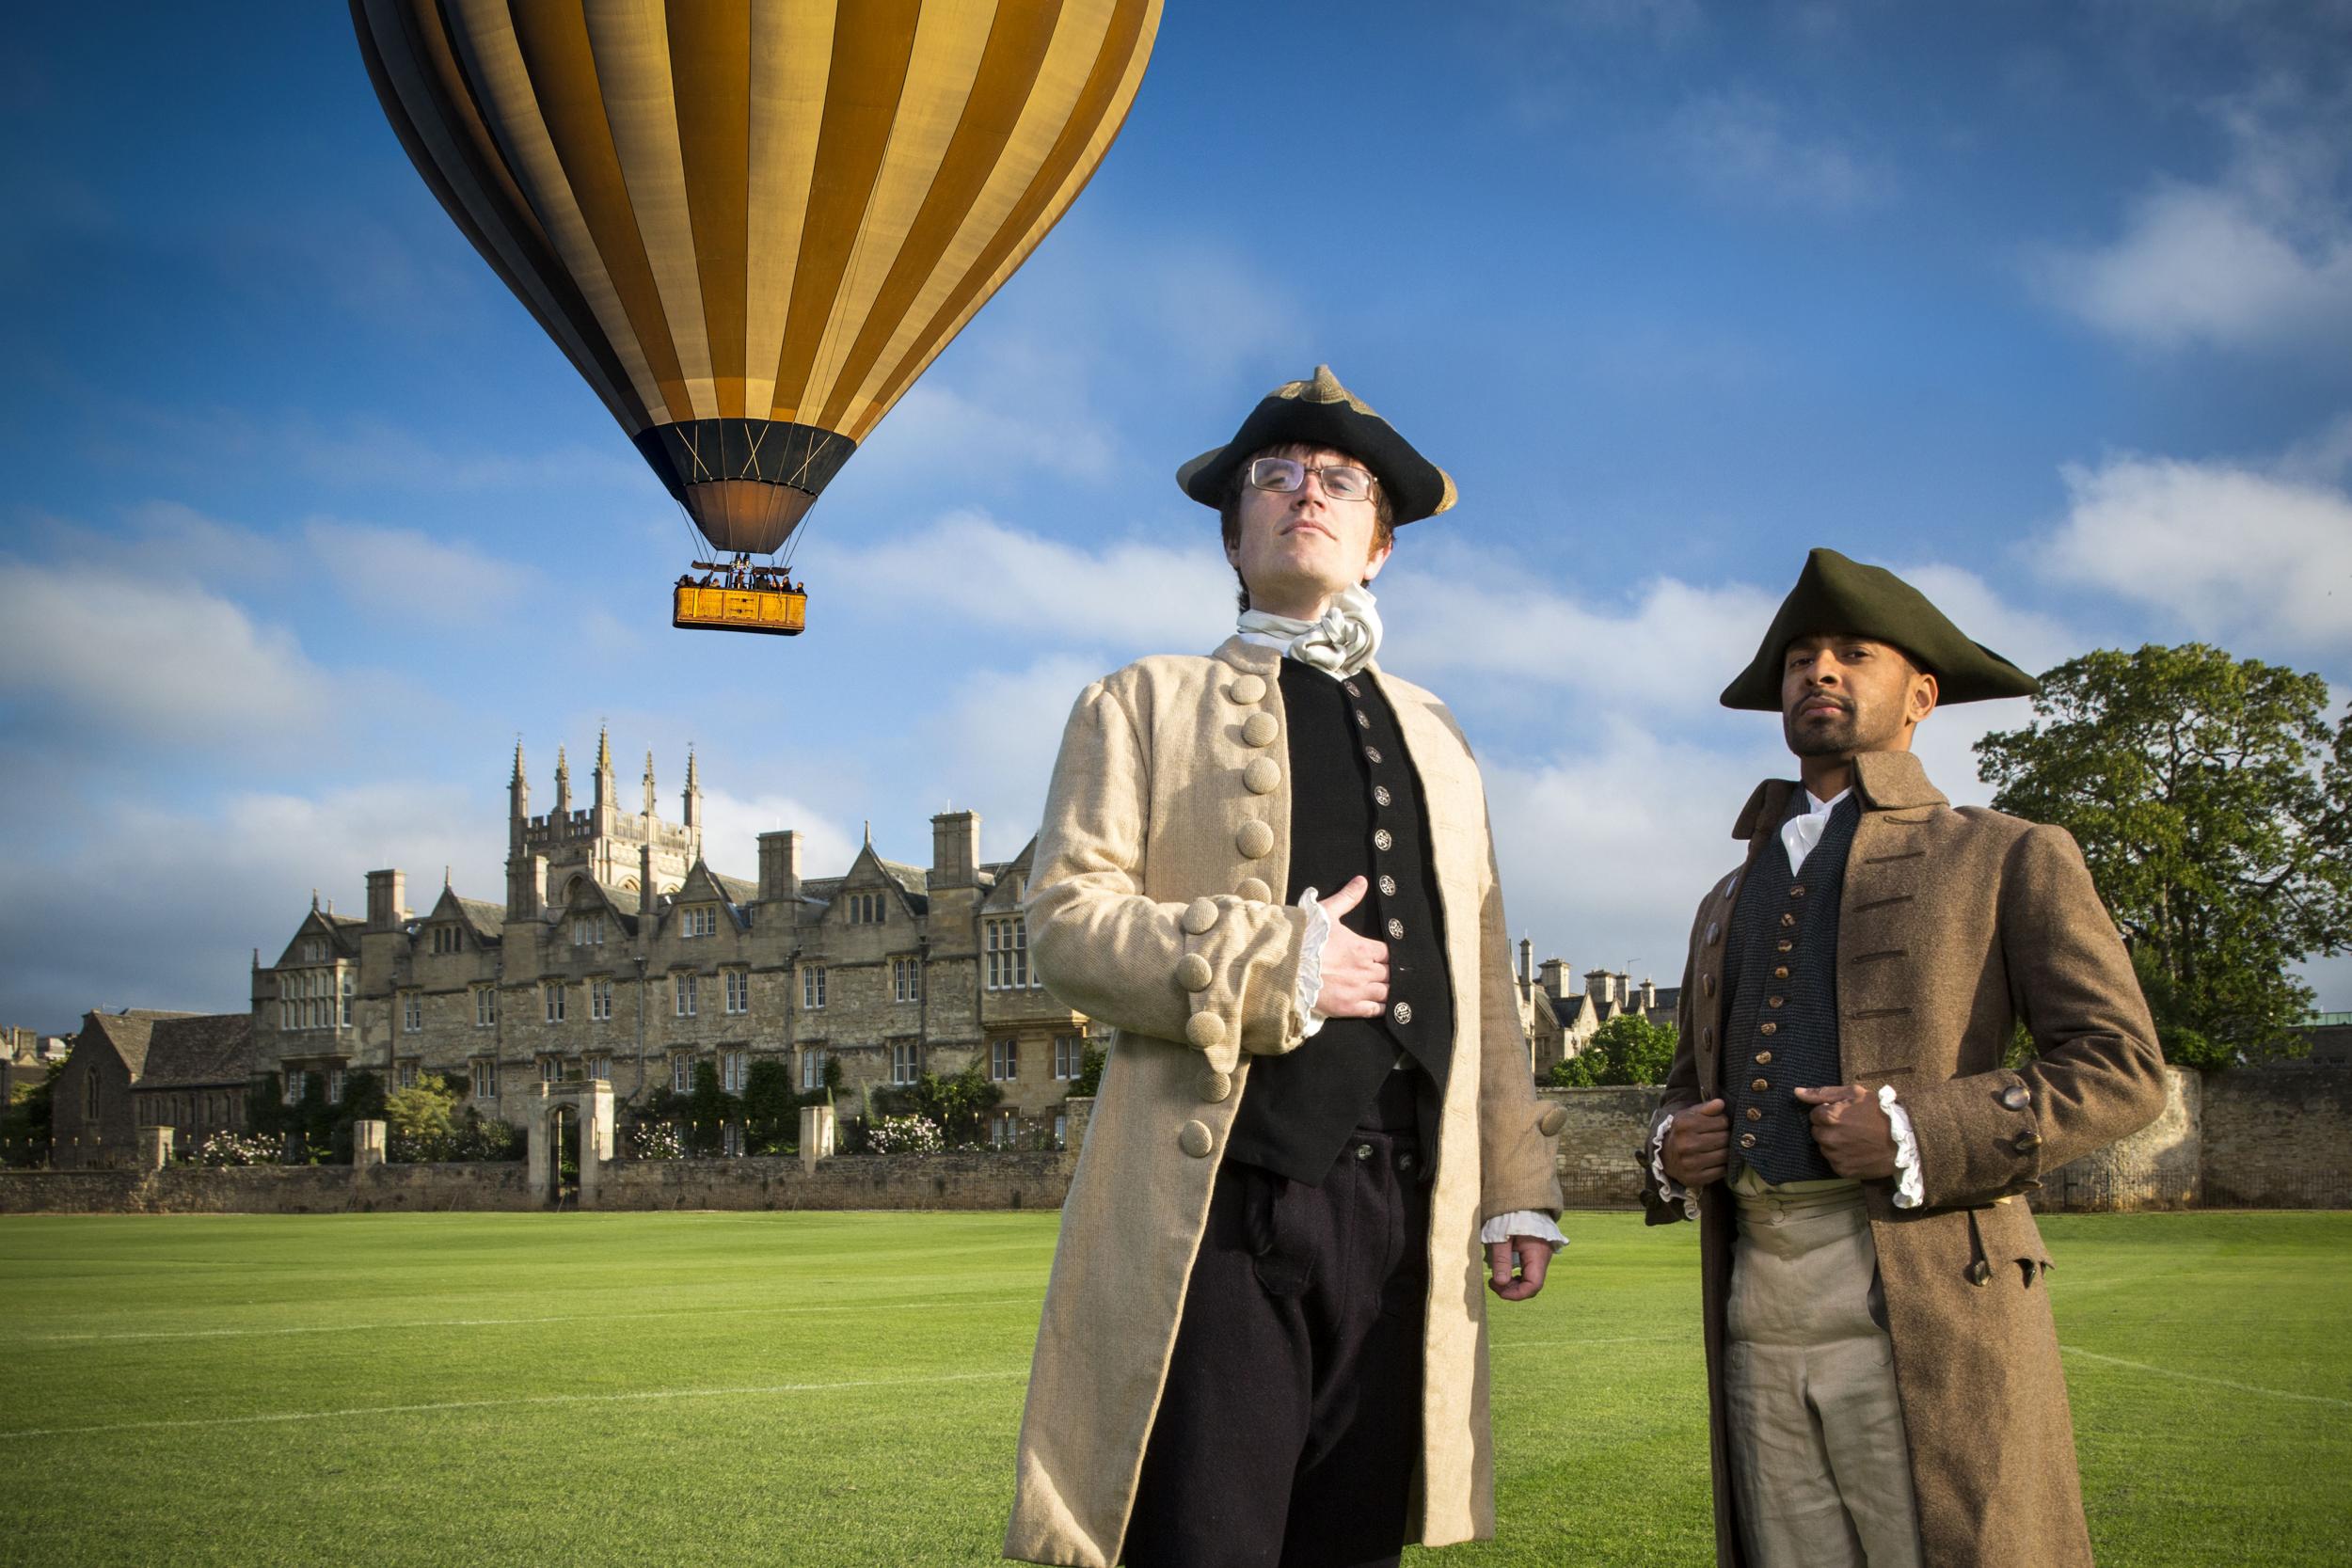 Monkman (left) and Seagull at the site of James Sadler’s 1784 hot air balloon flight in Oxford